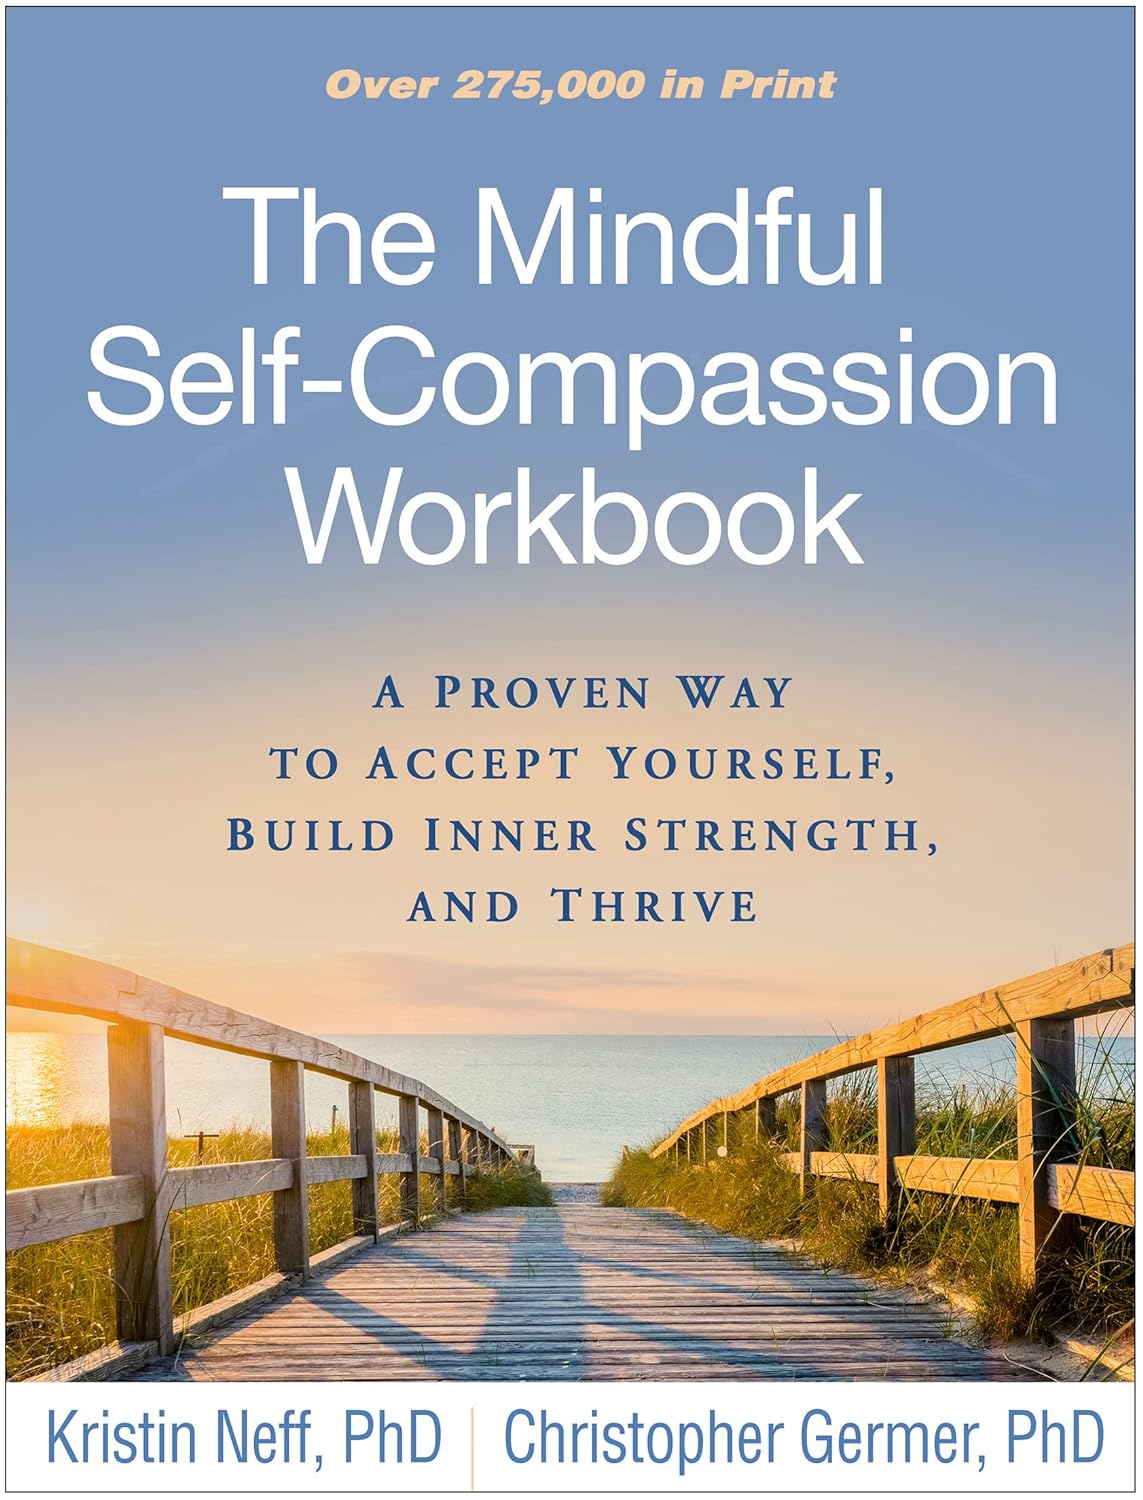 Book Cover - The Mindful Self-Compassion Workbook by Kristin Neff and Christopher Germer